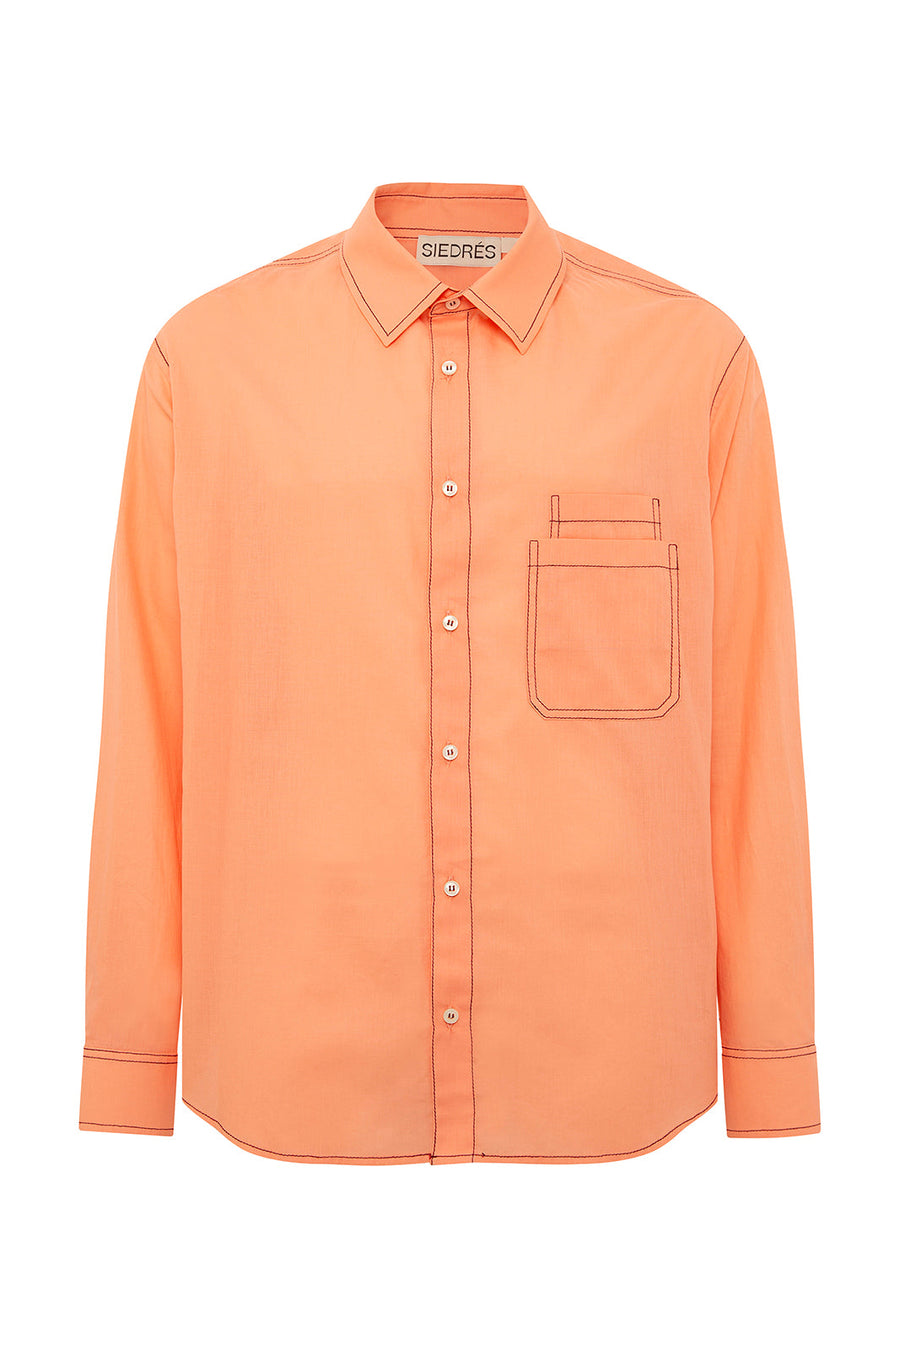 MATEO - Long sleeve shirt with double pockets